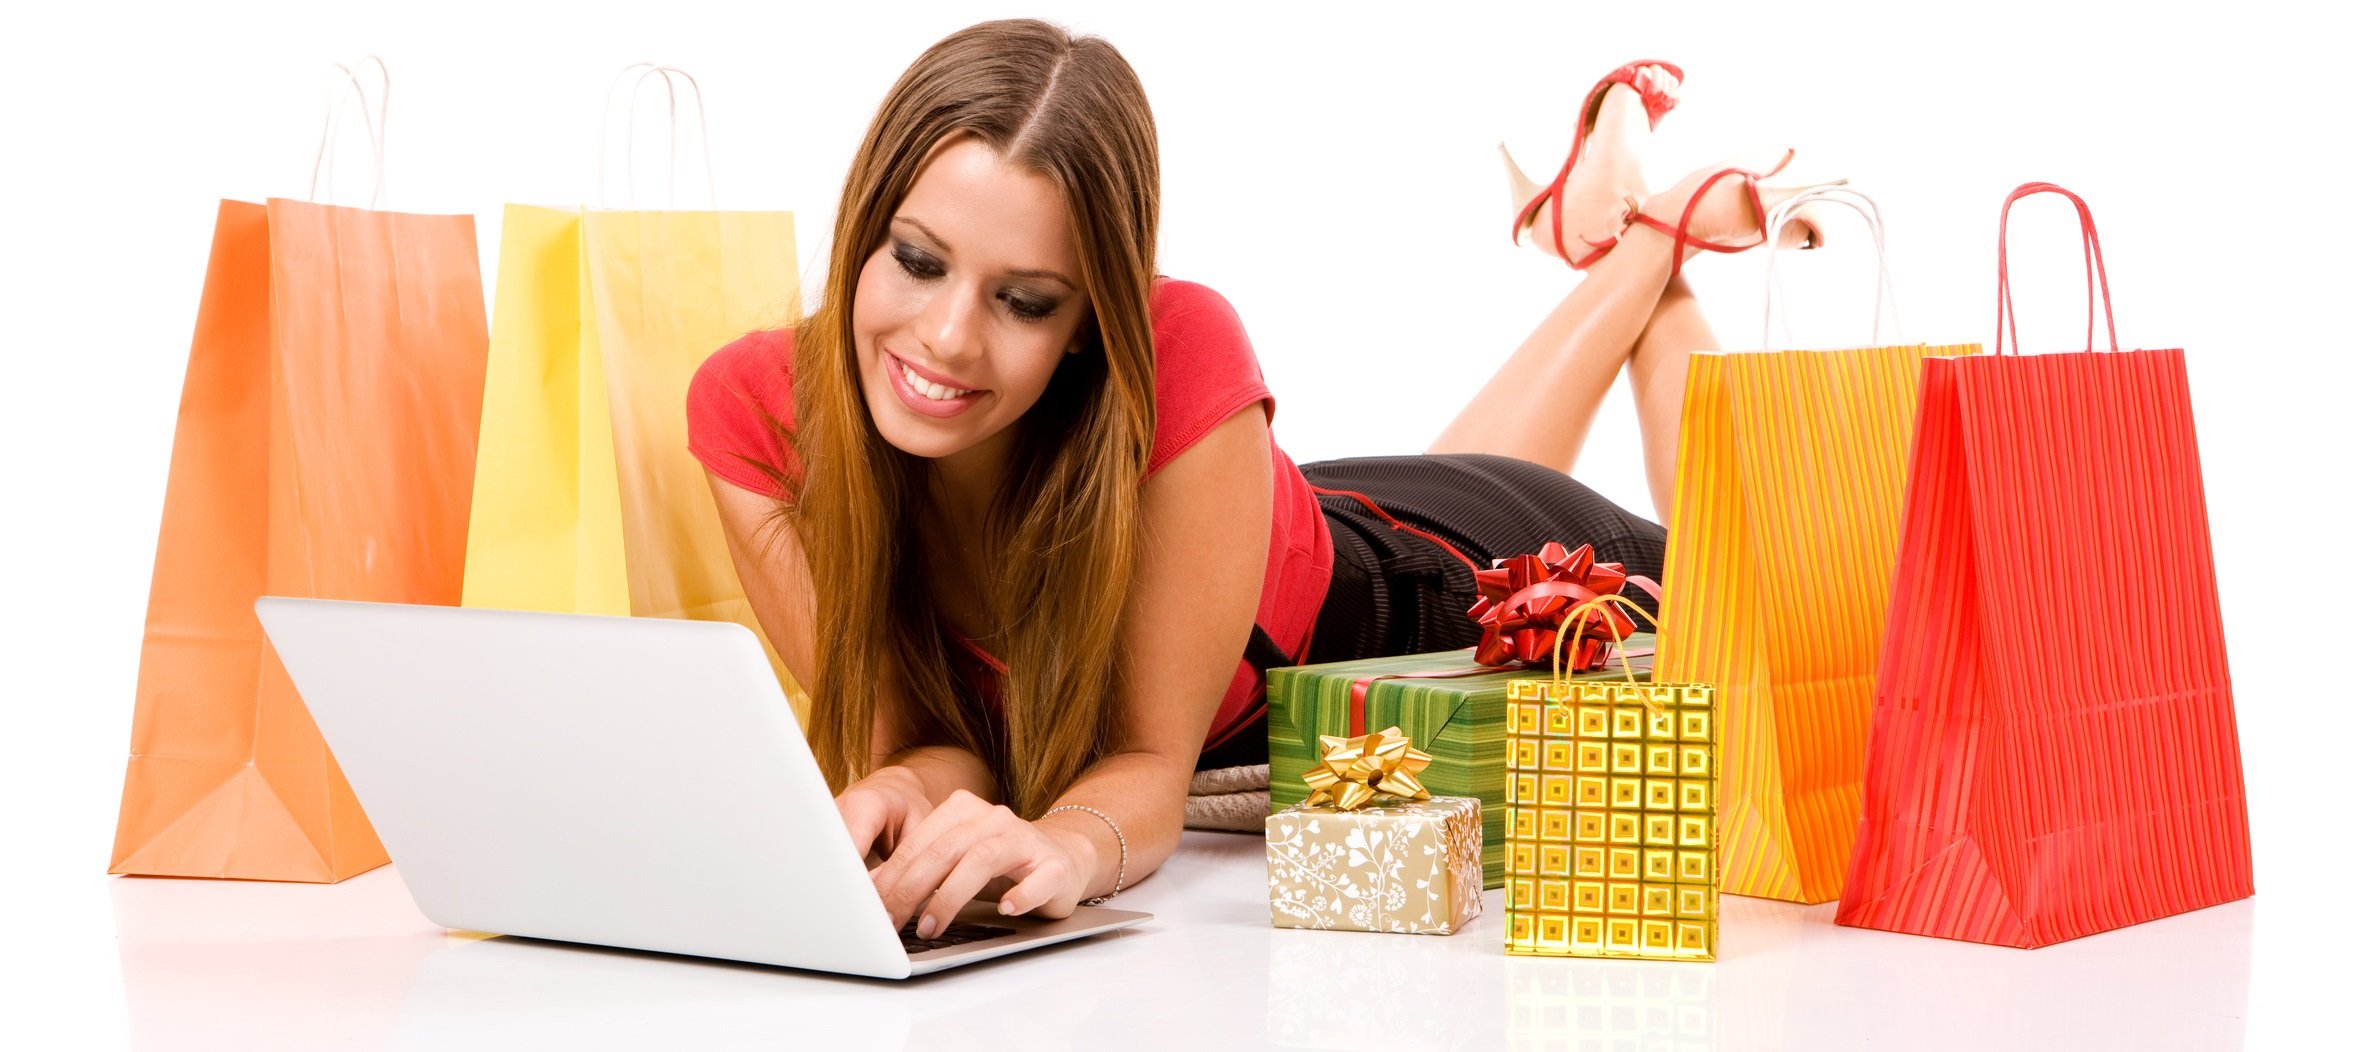 Beautiful young woman shopping over internet.